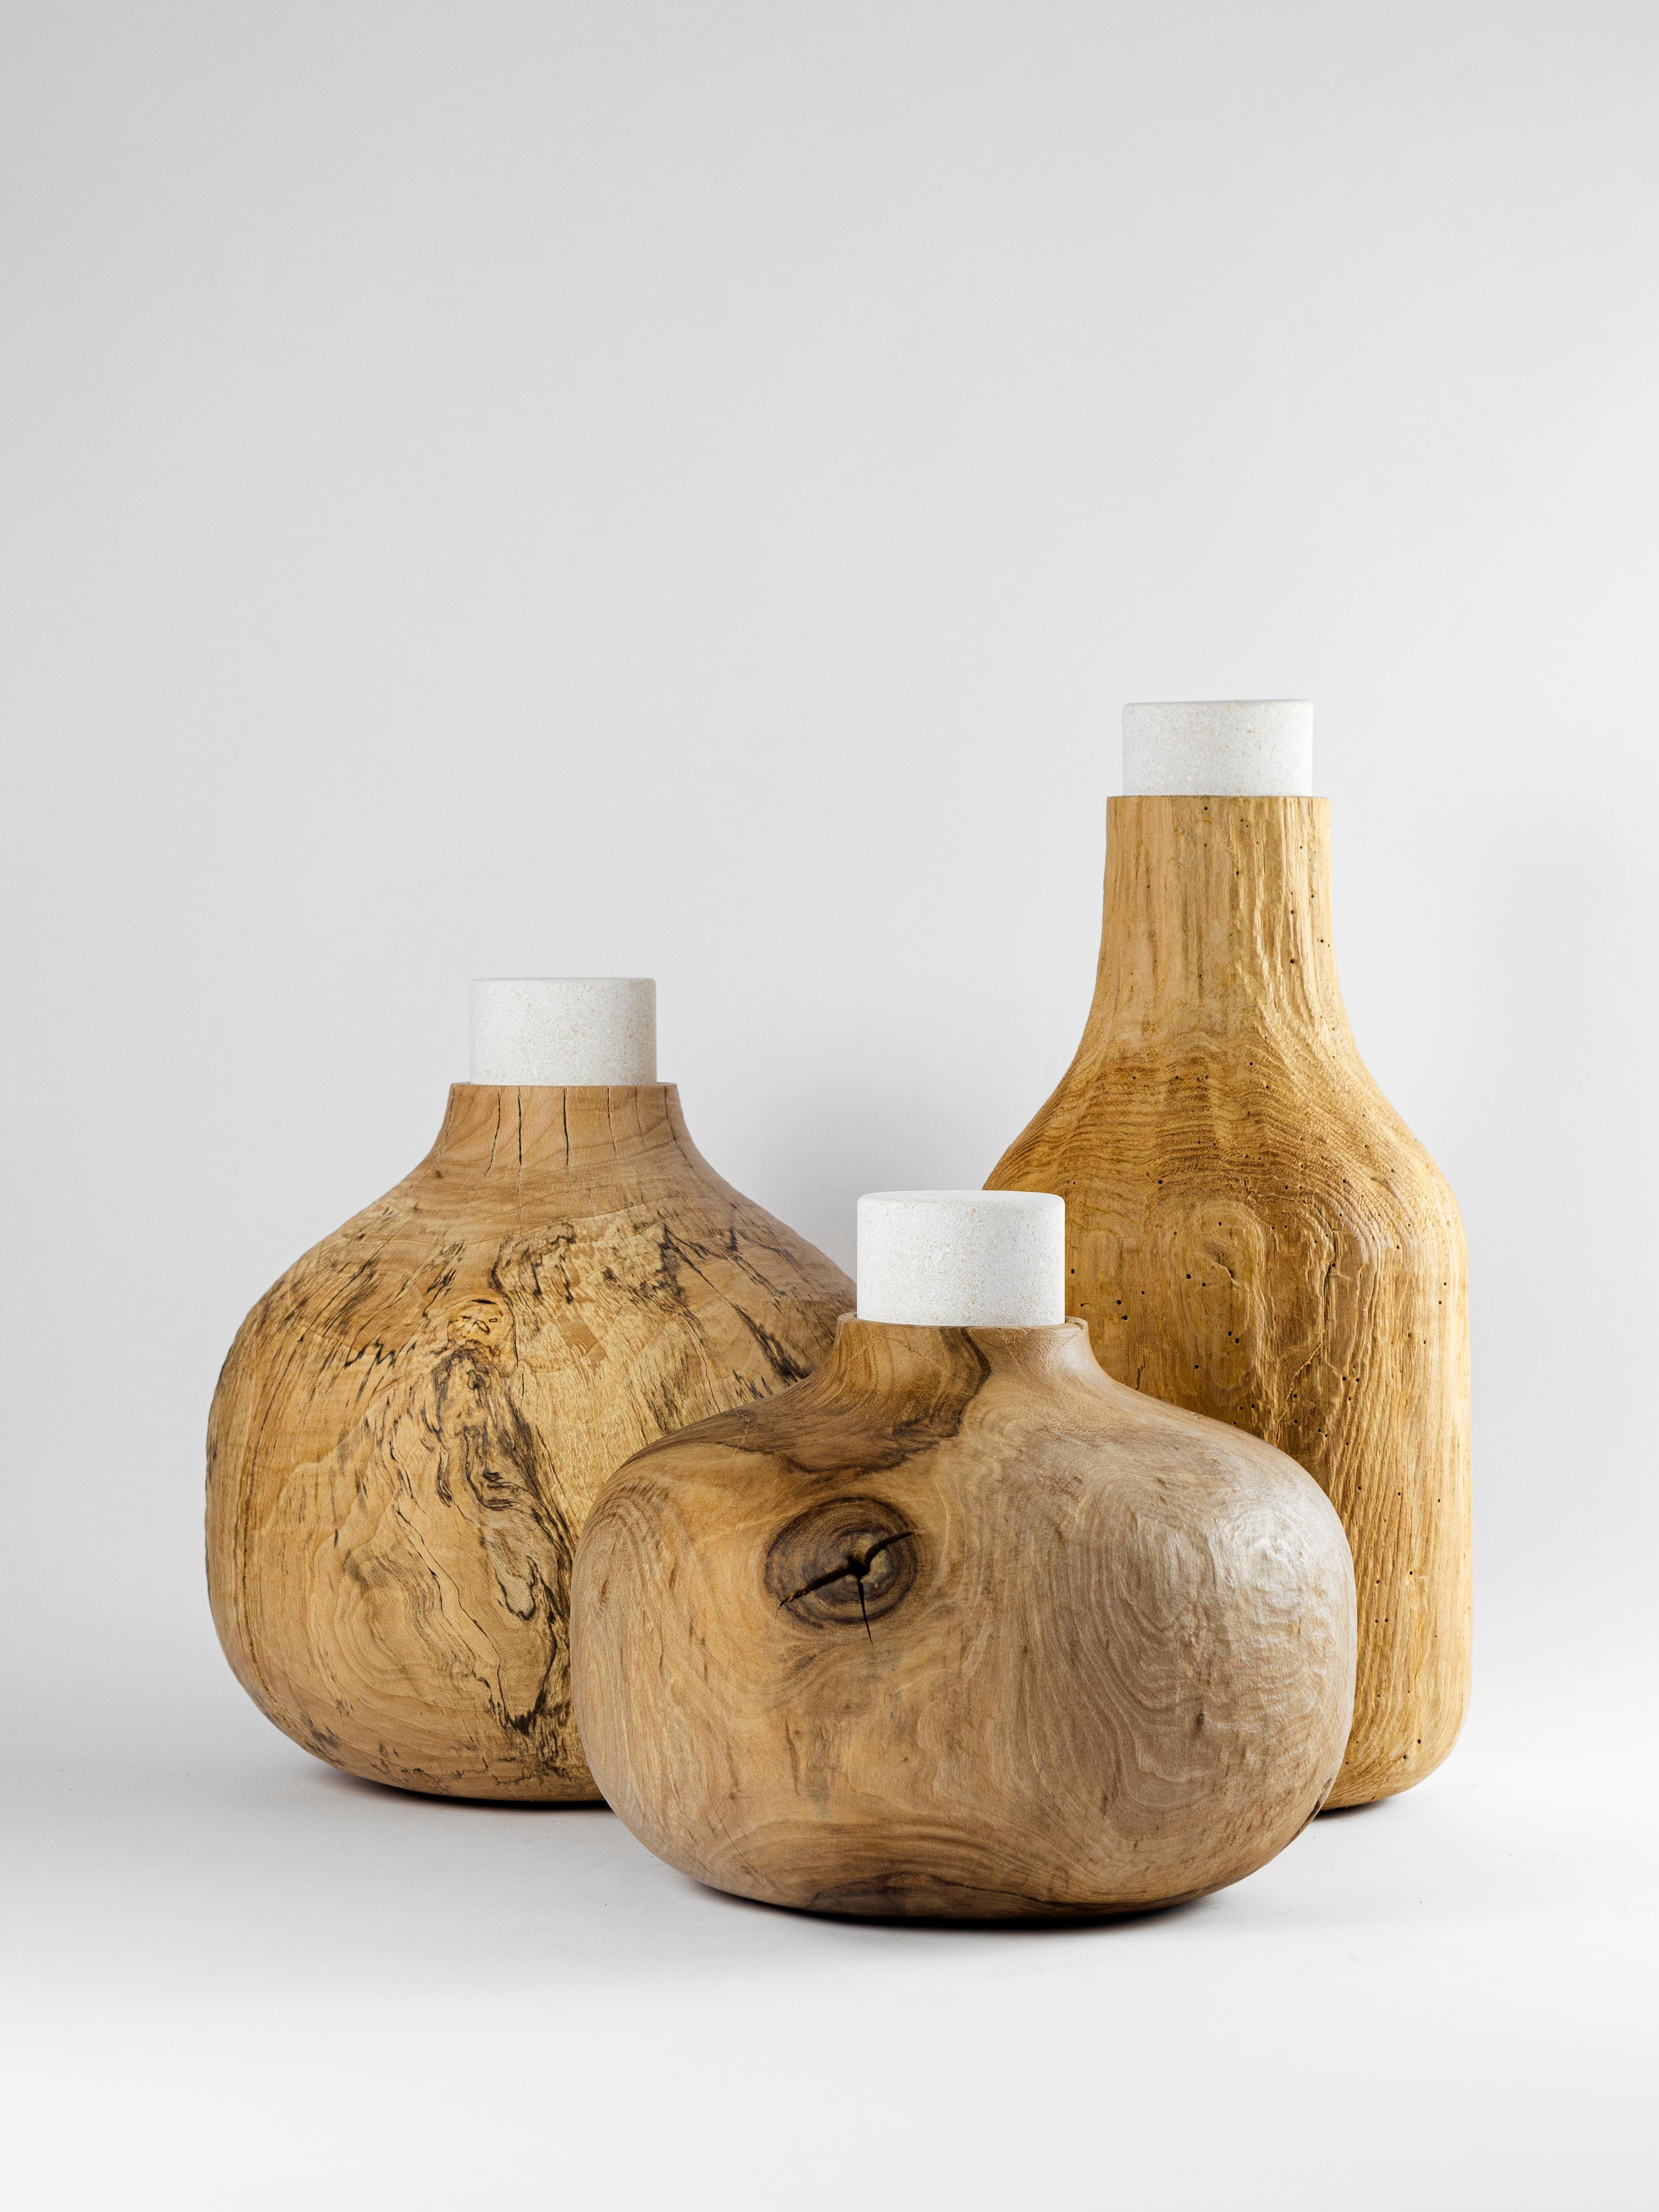 A collection of vases in Vicentina Stone and wood of Walnut, Beech, Alder and Chestnut that comes from the theme of the 